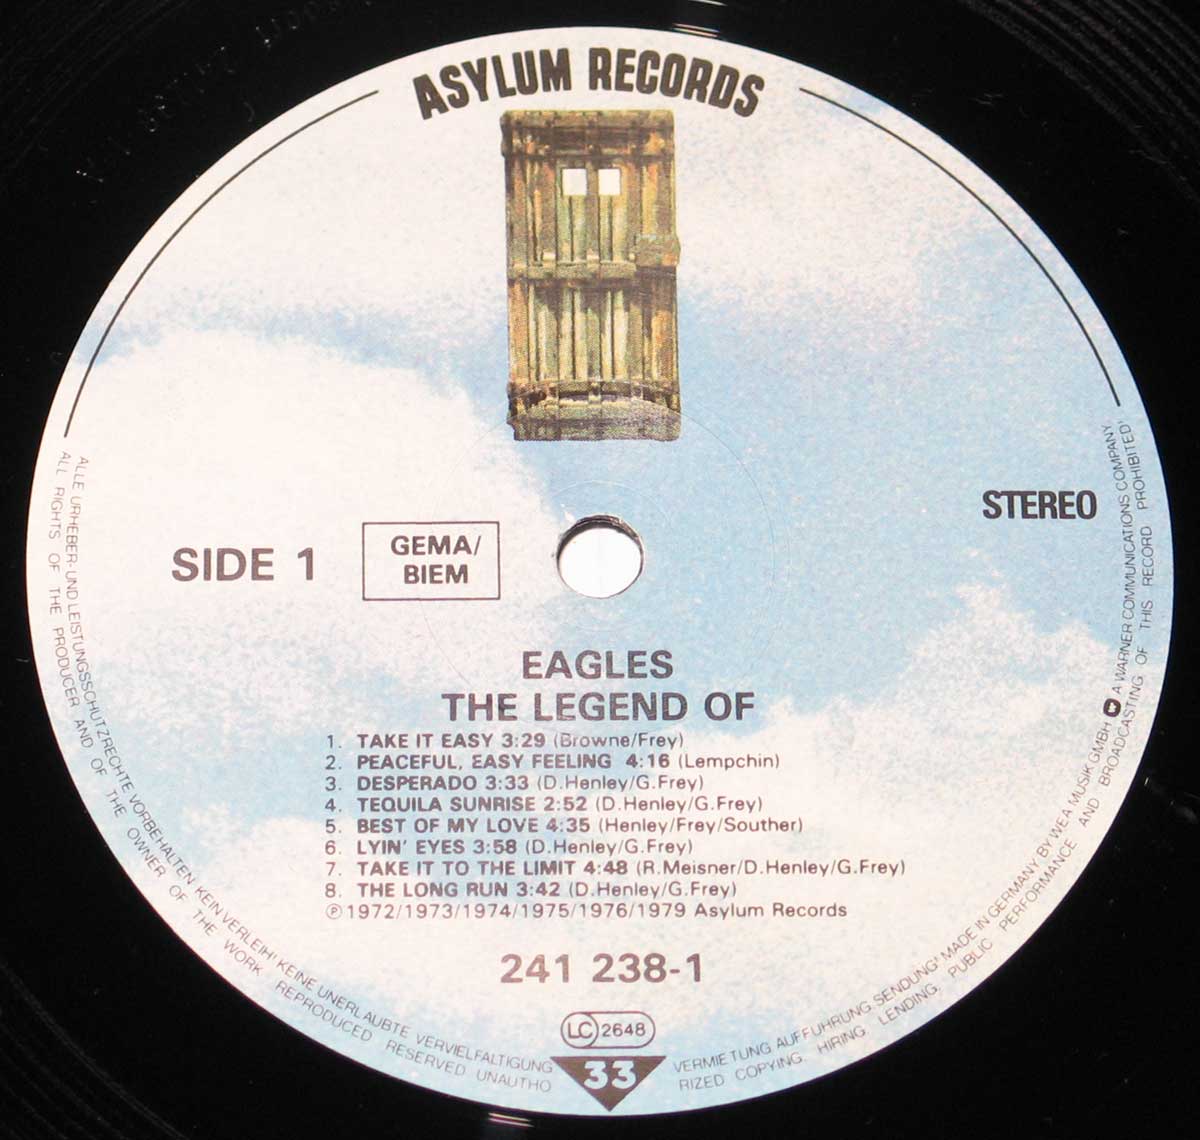 Close-up of the Asylum Records label for the Legend Of The Eagles  